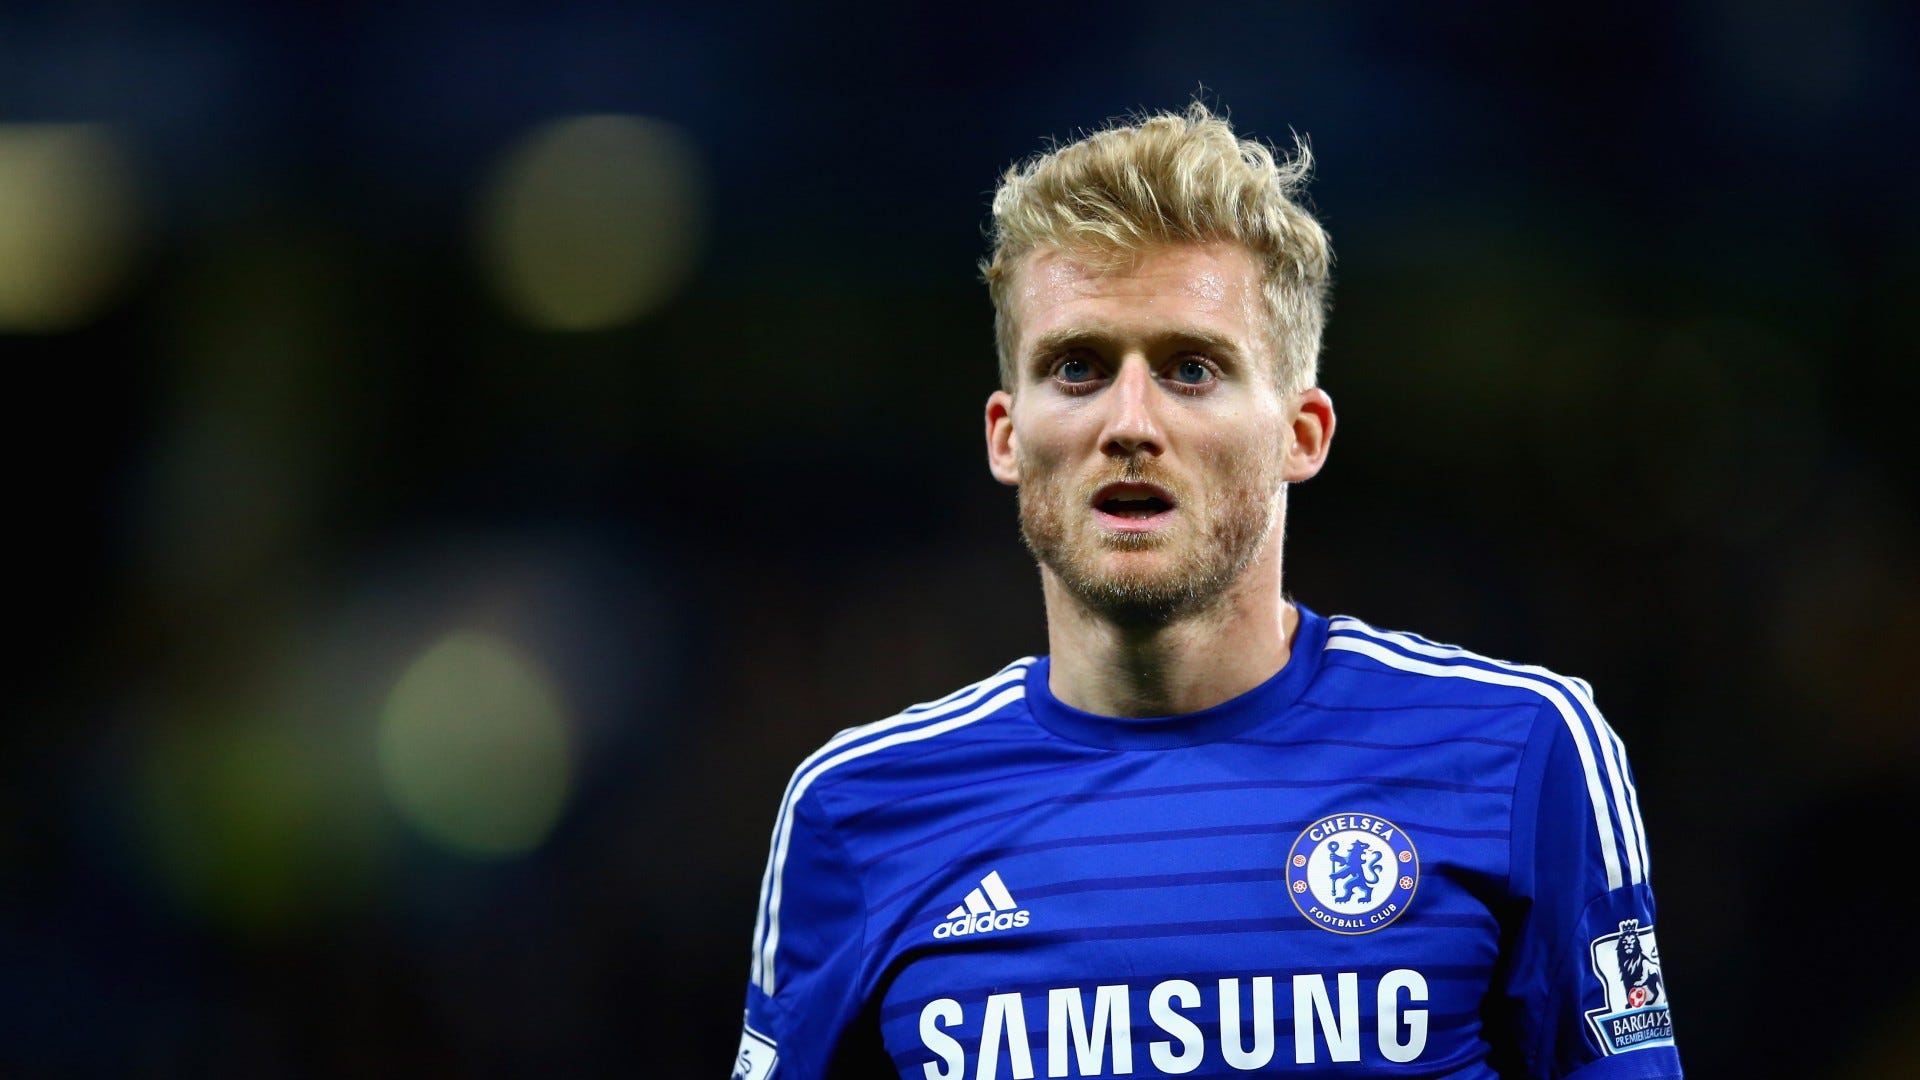 ANDRE SCHURRLE CHELSEA BOLTON WANDERERS CAPITAL ONE CUP 09242014